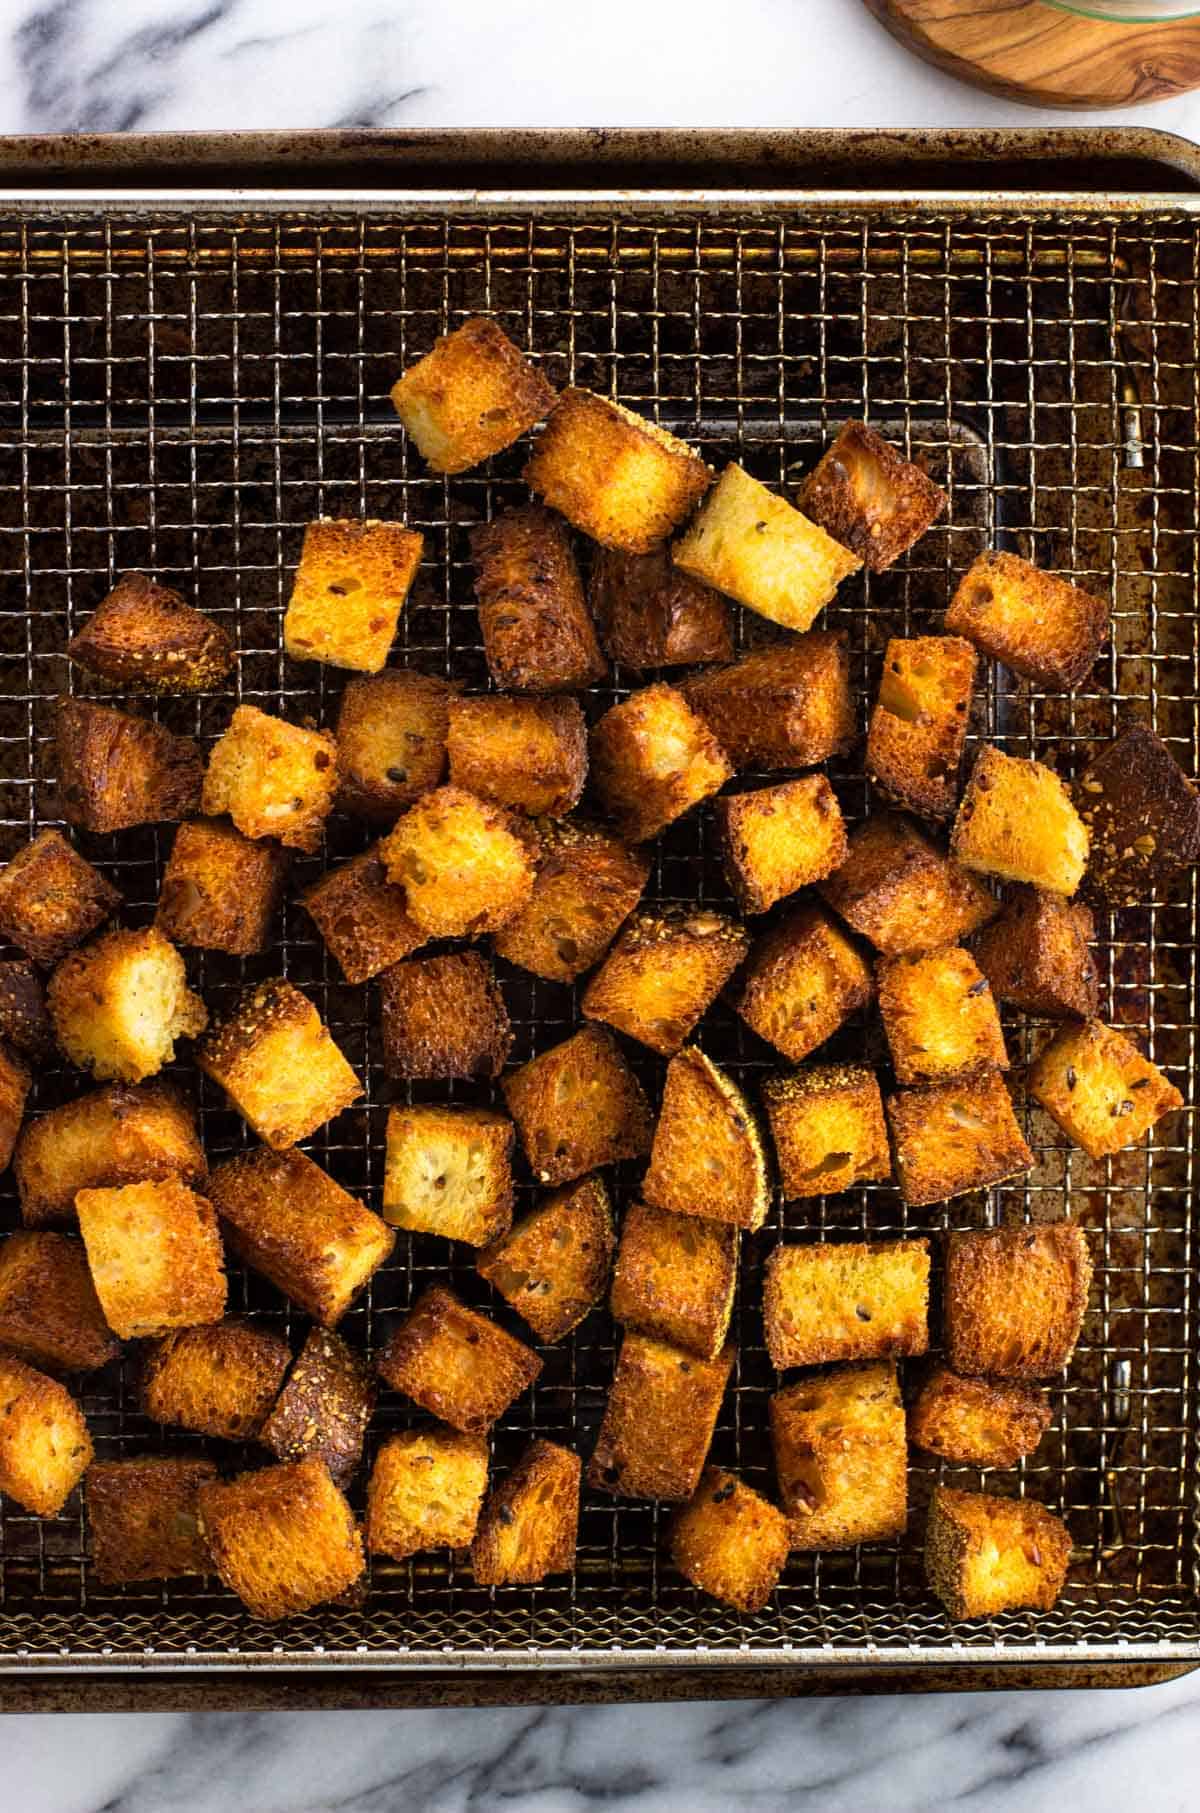 Air fryer croutons on a wire air fryer basket.